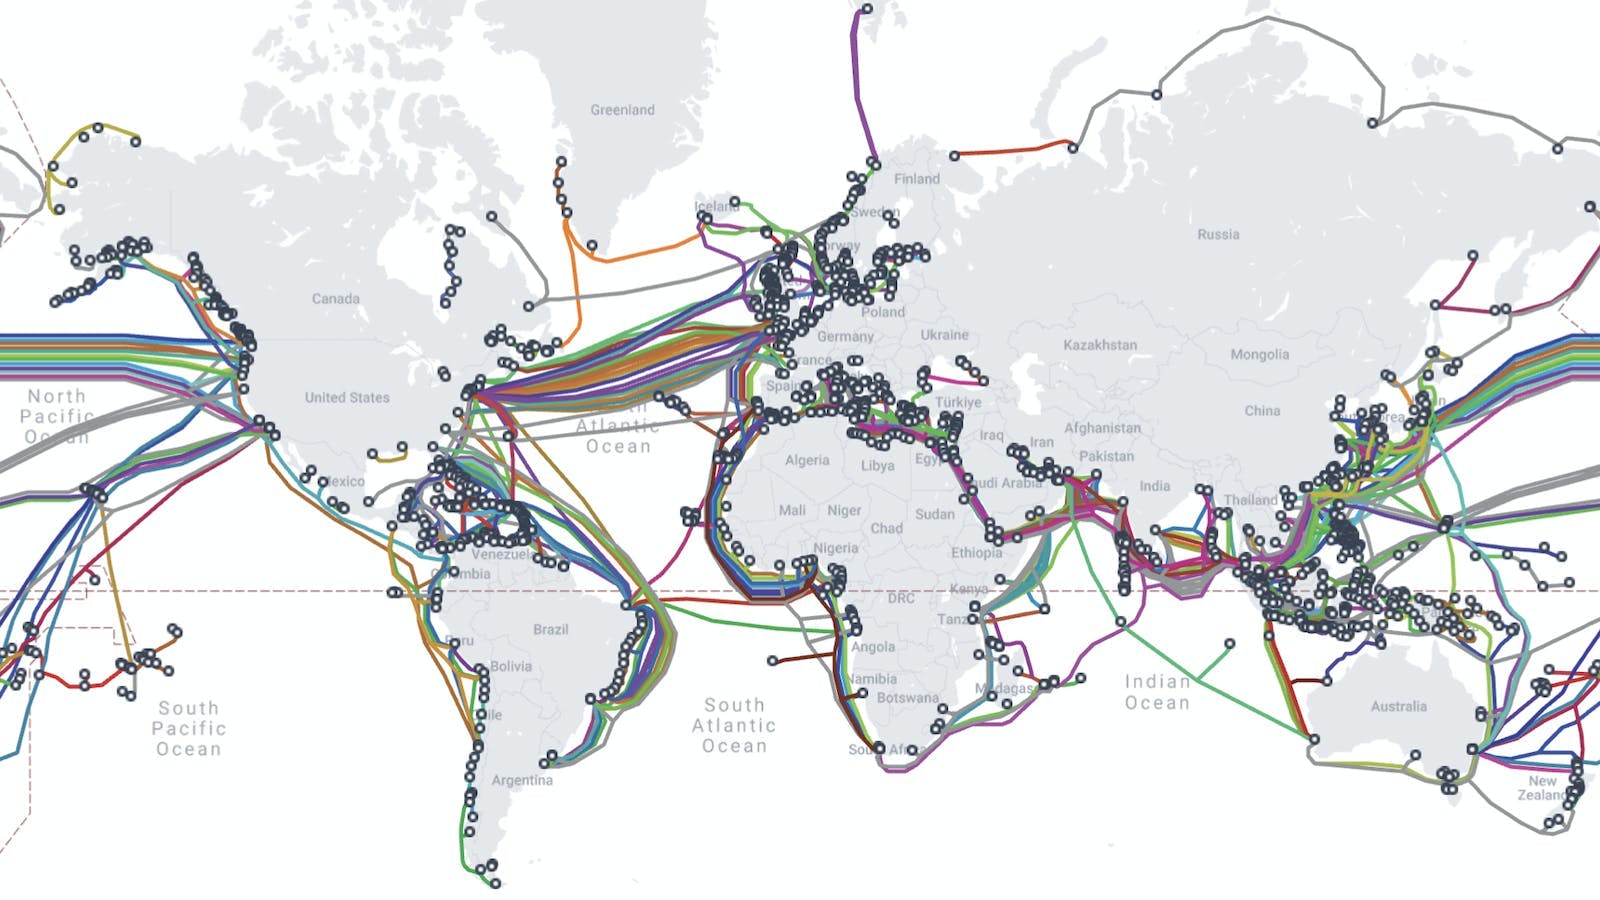 Figure 1: A map of the world showing all submarine cables currently used for the internet.